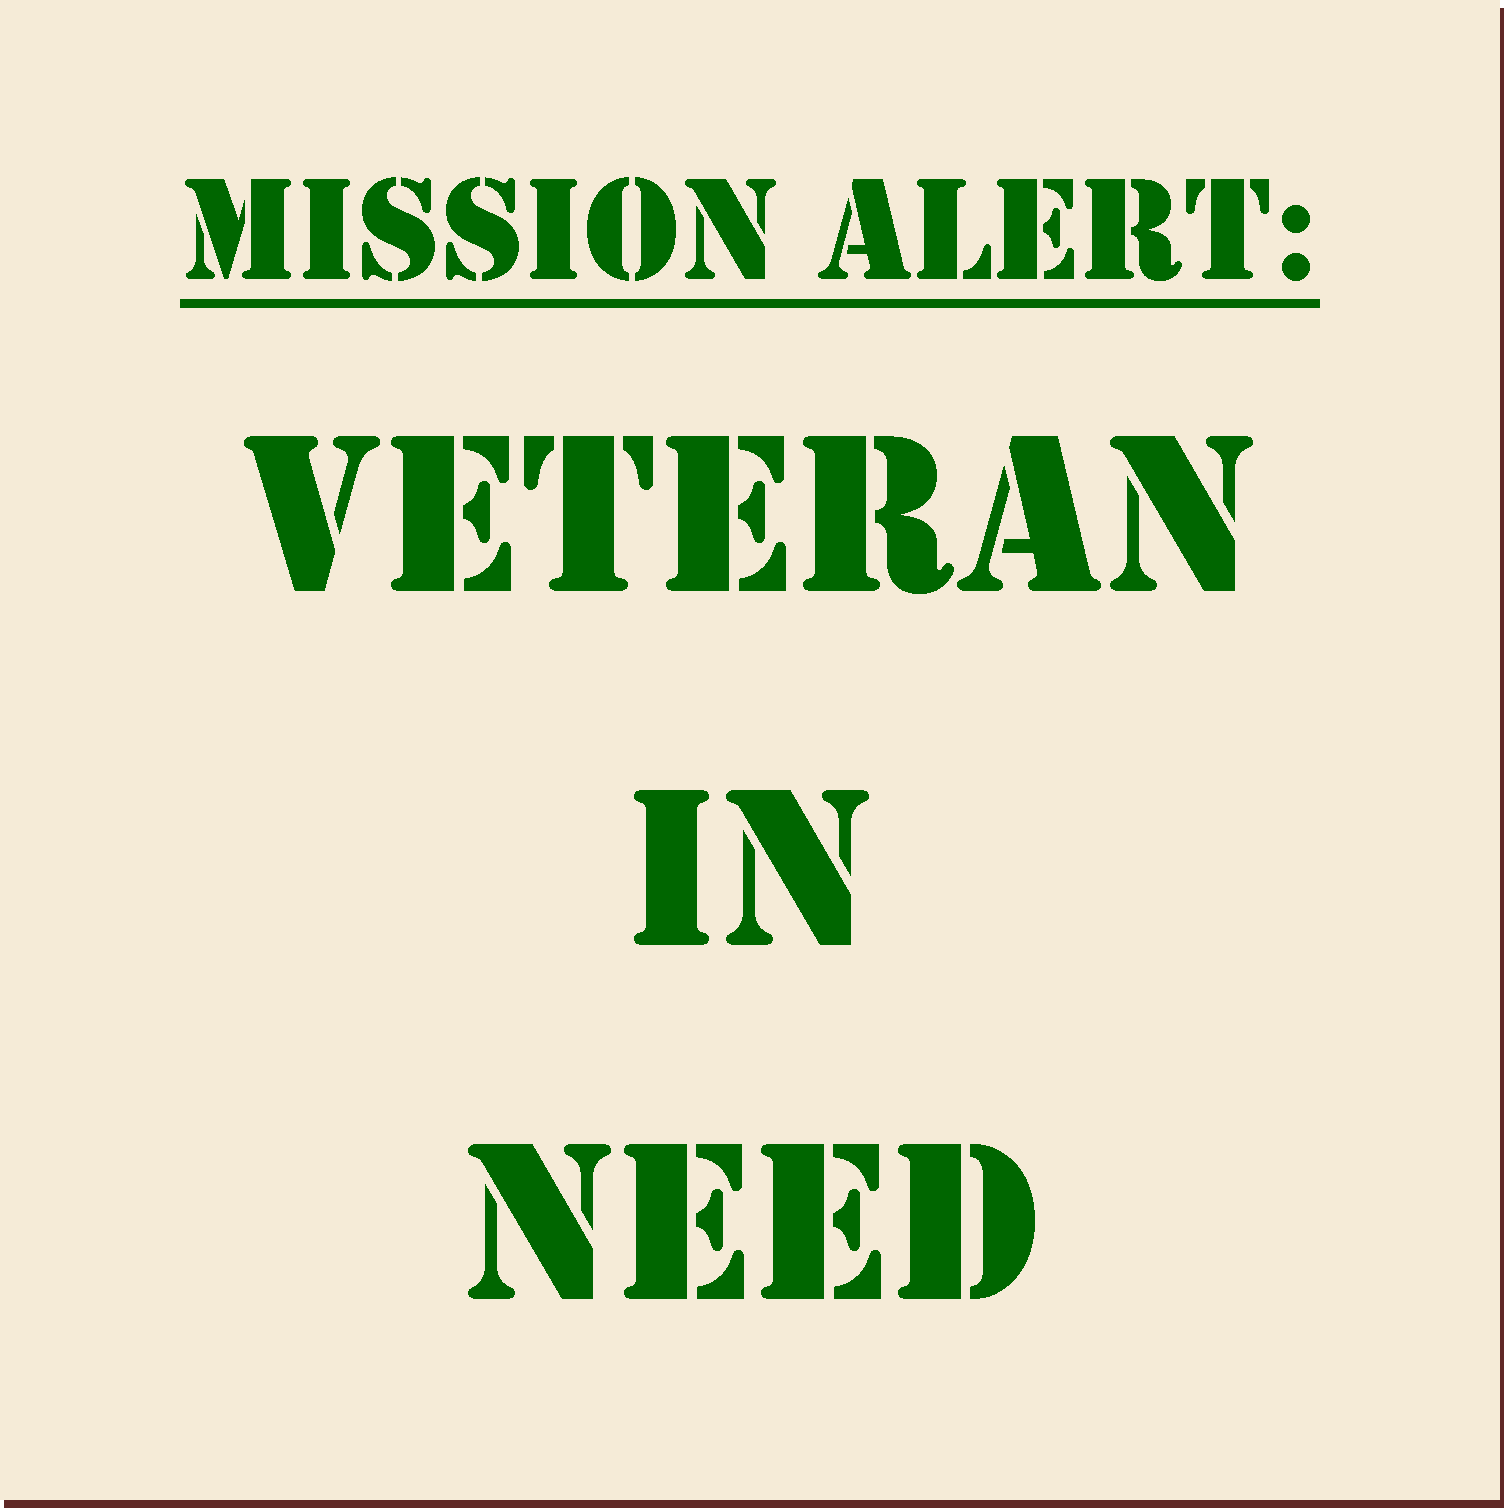 Marine Veteran needs assistance.  collection date Saturday 9/20 ...